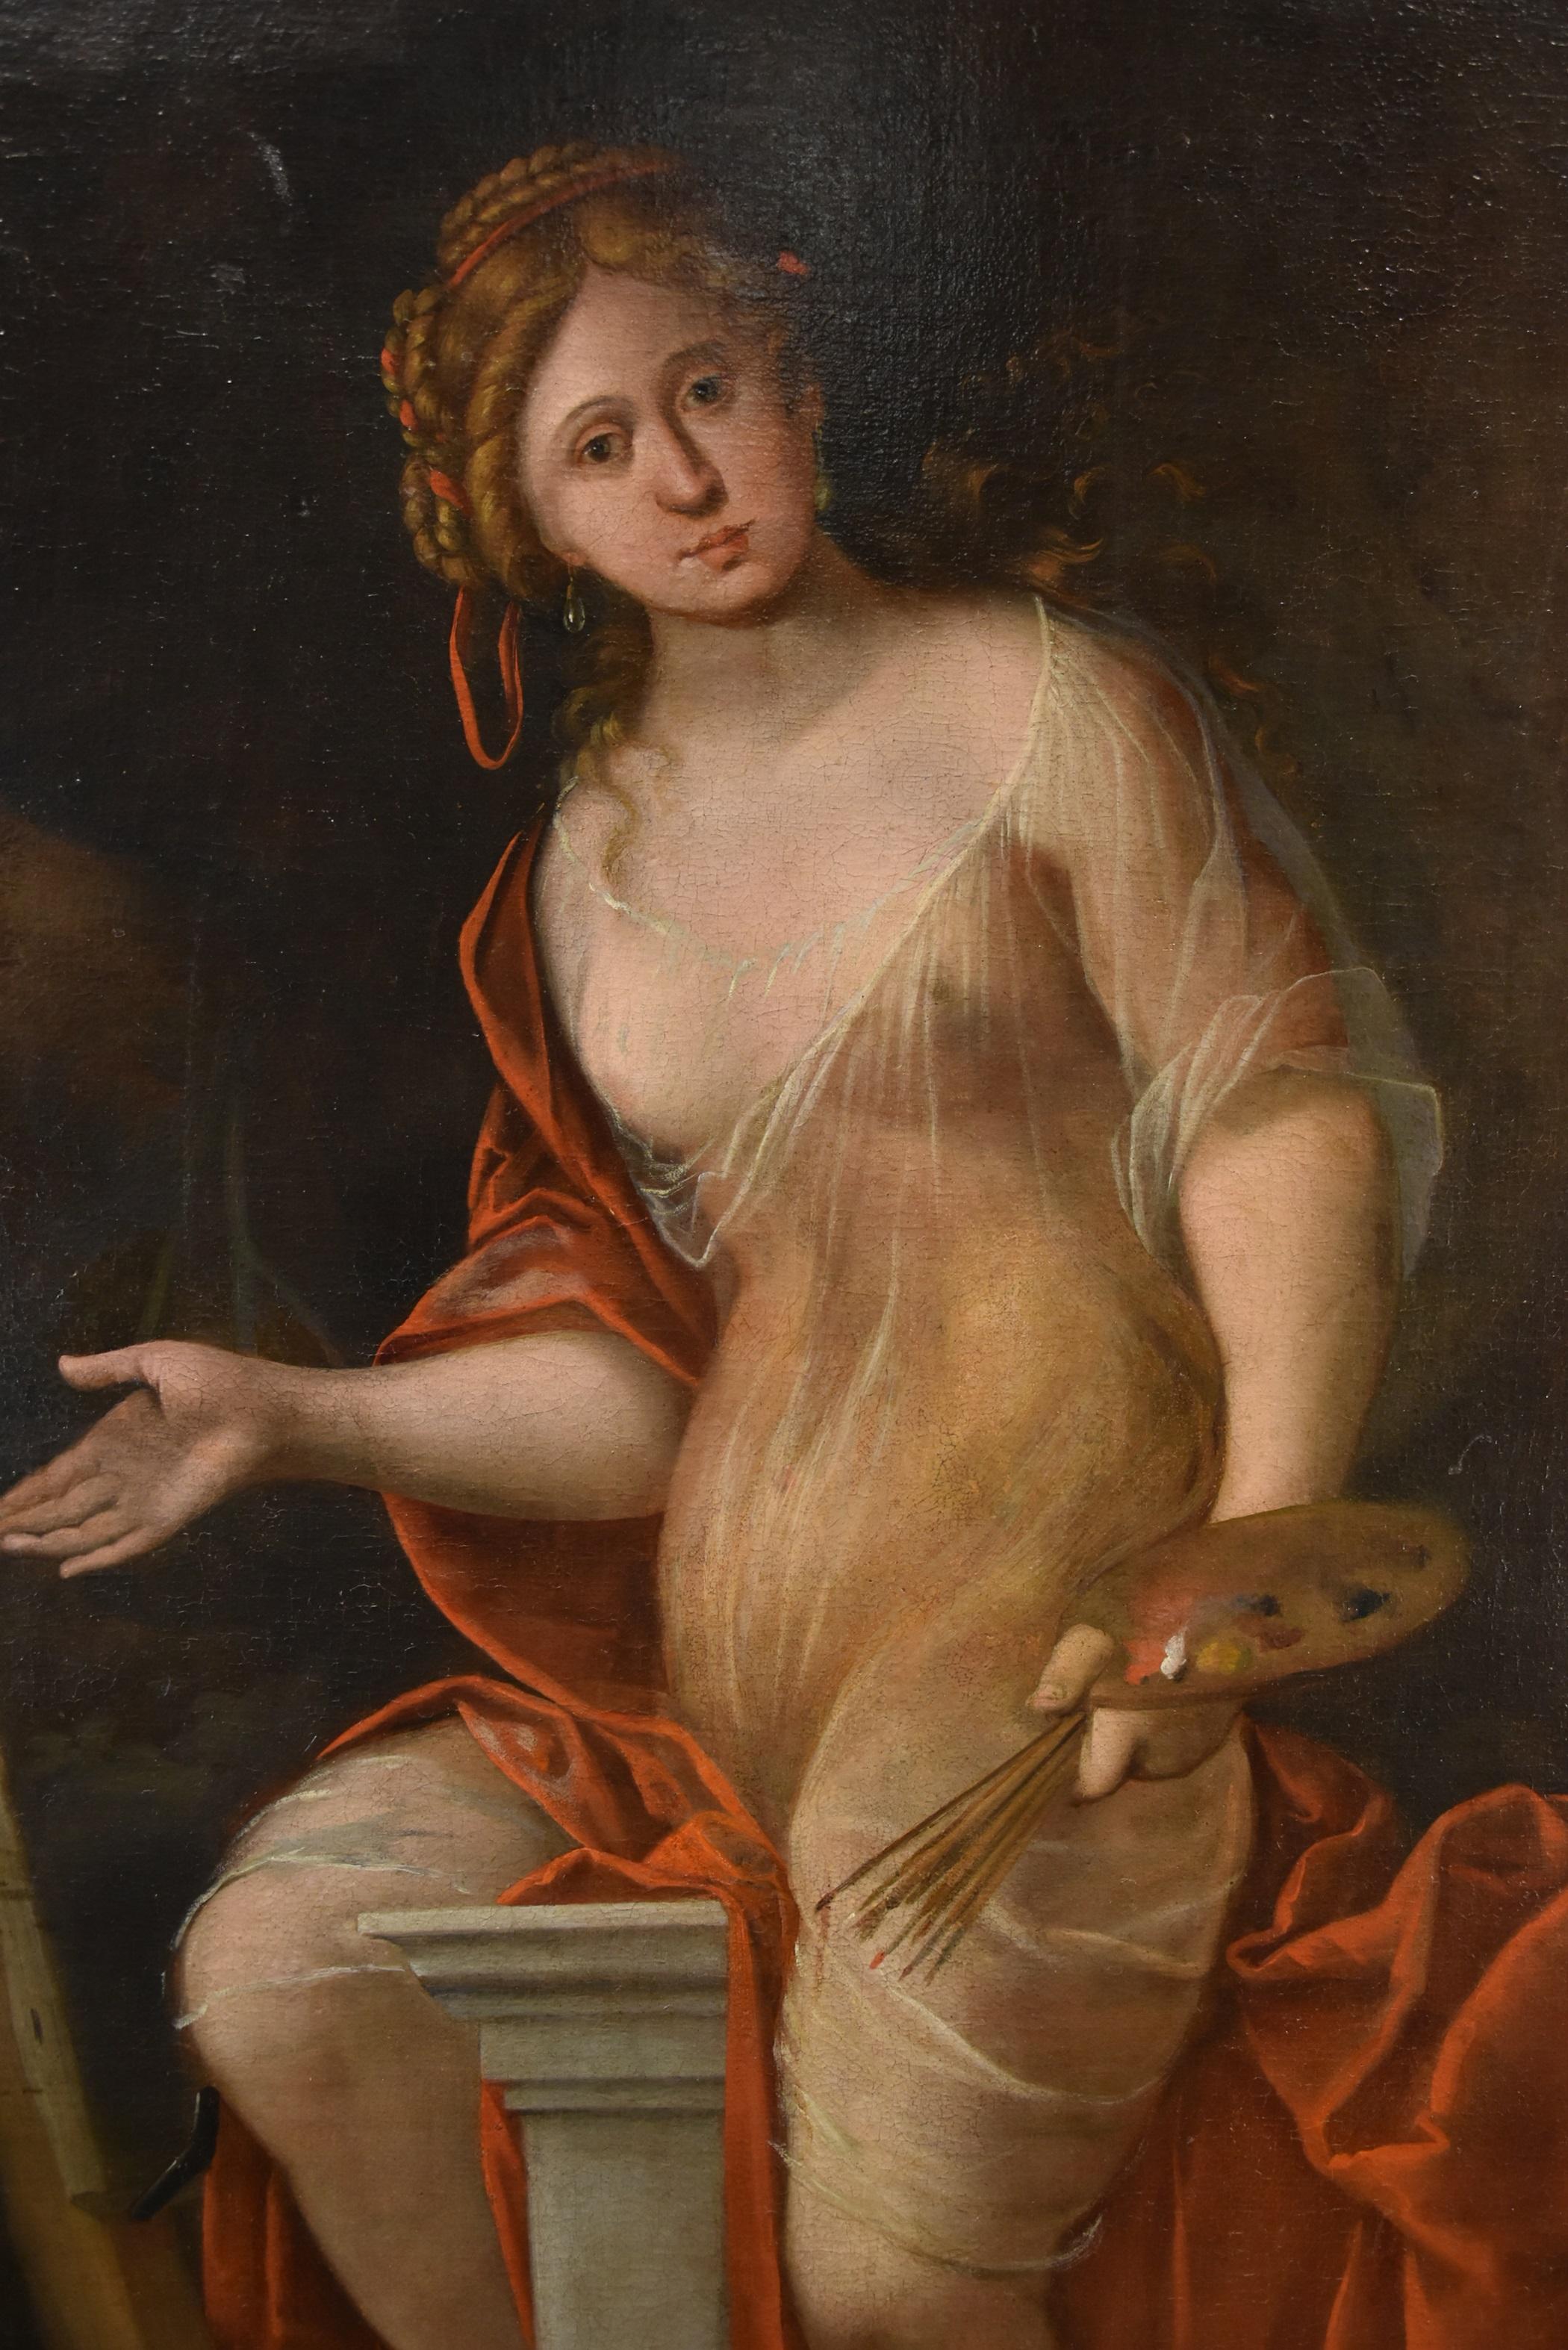 Terwesten Woman Allegory Art Paint Oil on canvas 17/18th Century Old master  For Sale 4